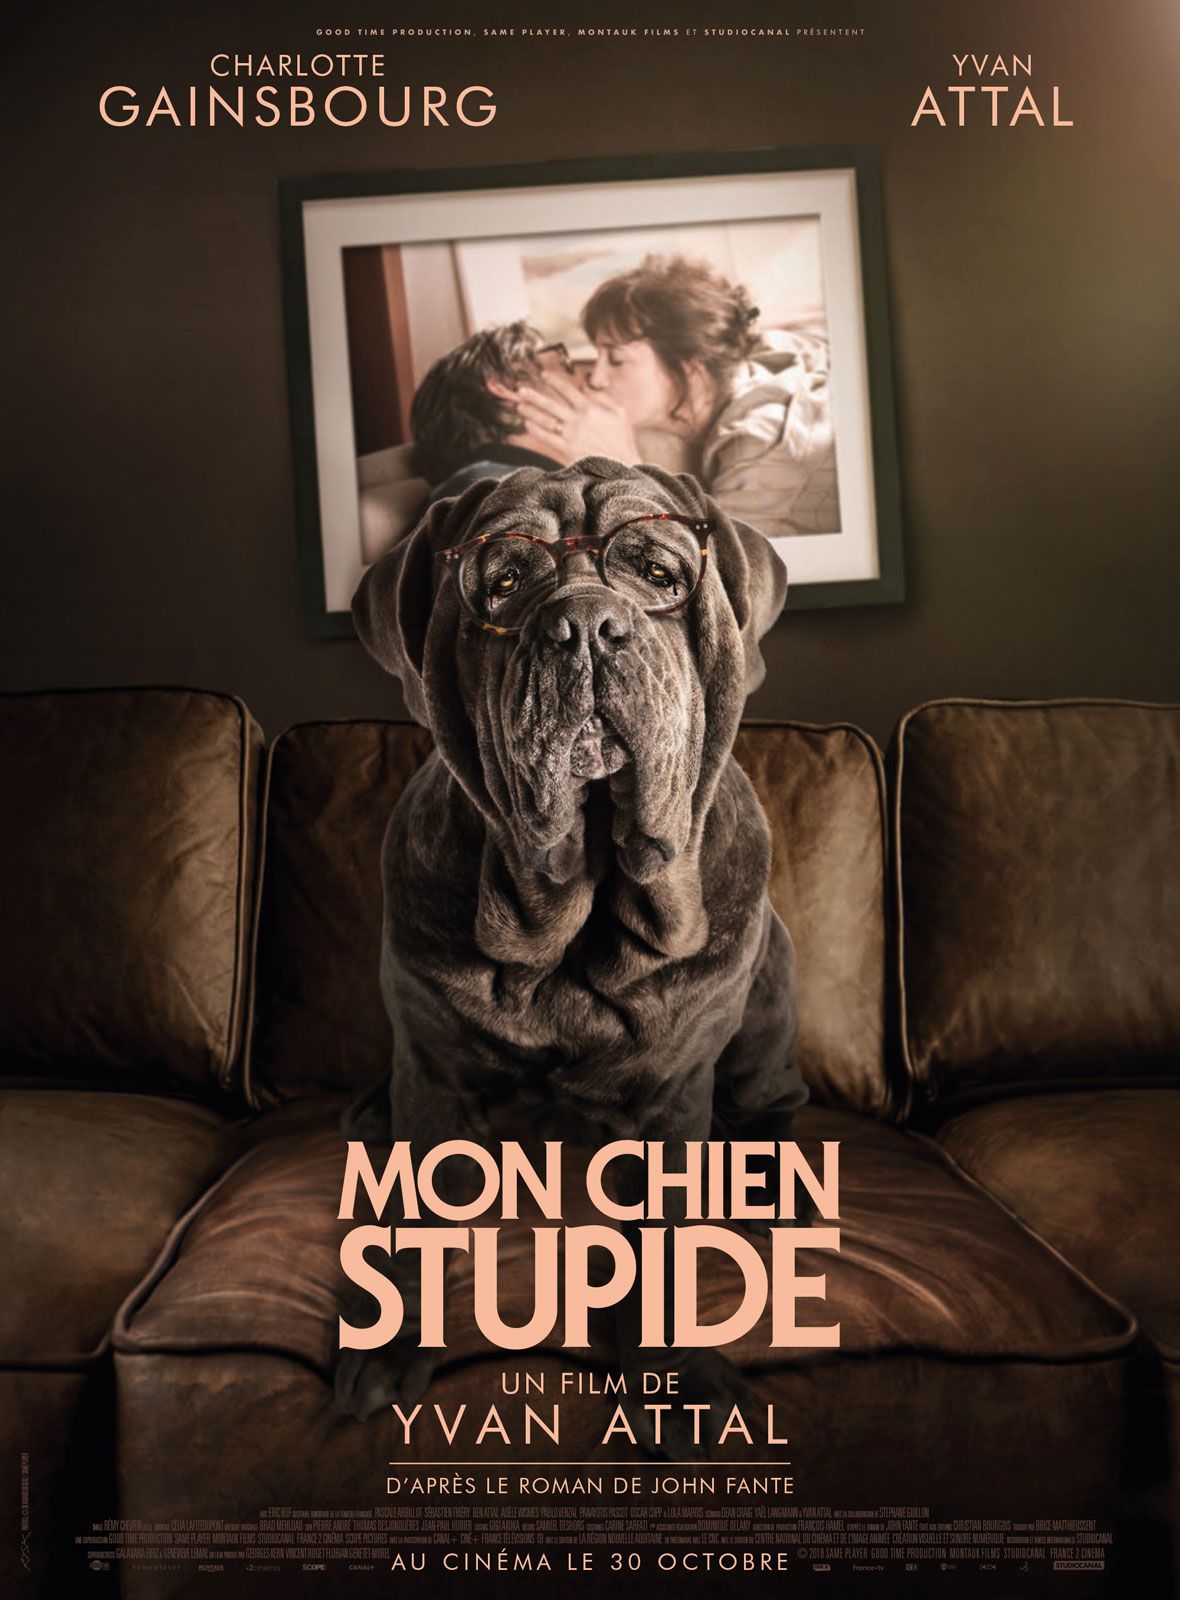 Mon chien Stupide - Film (2019) streaming VF gratuit complet